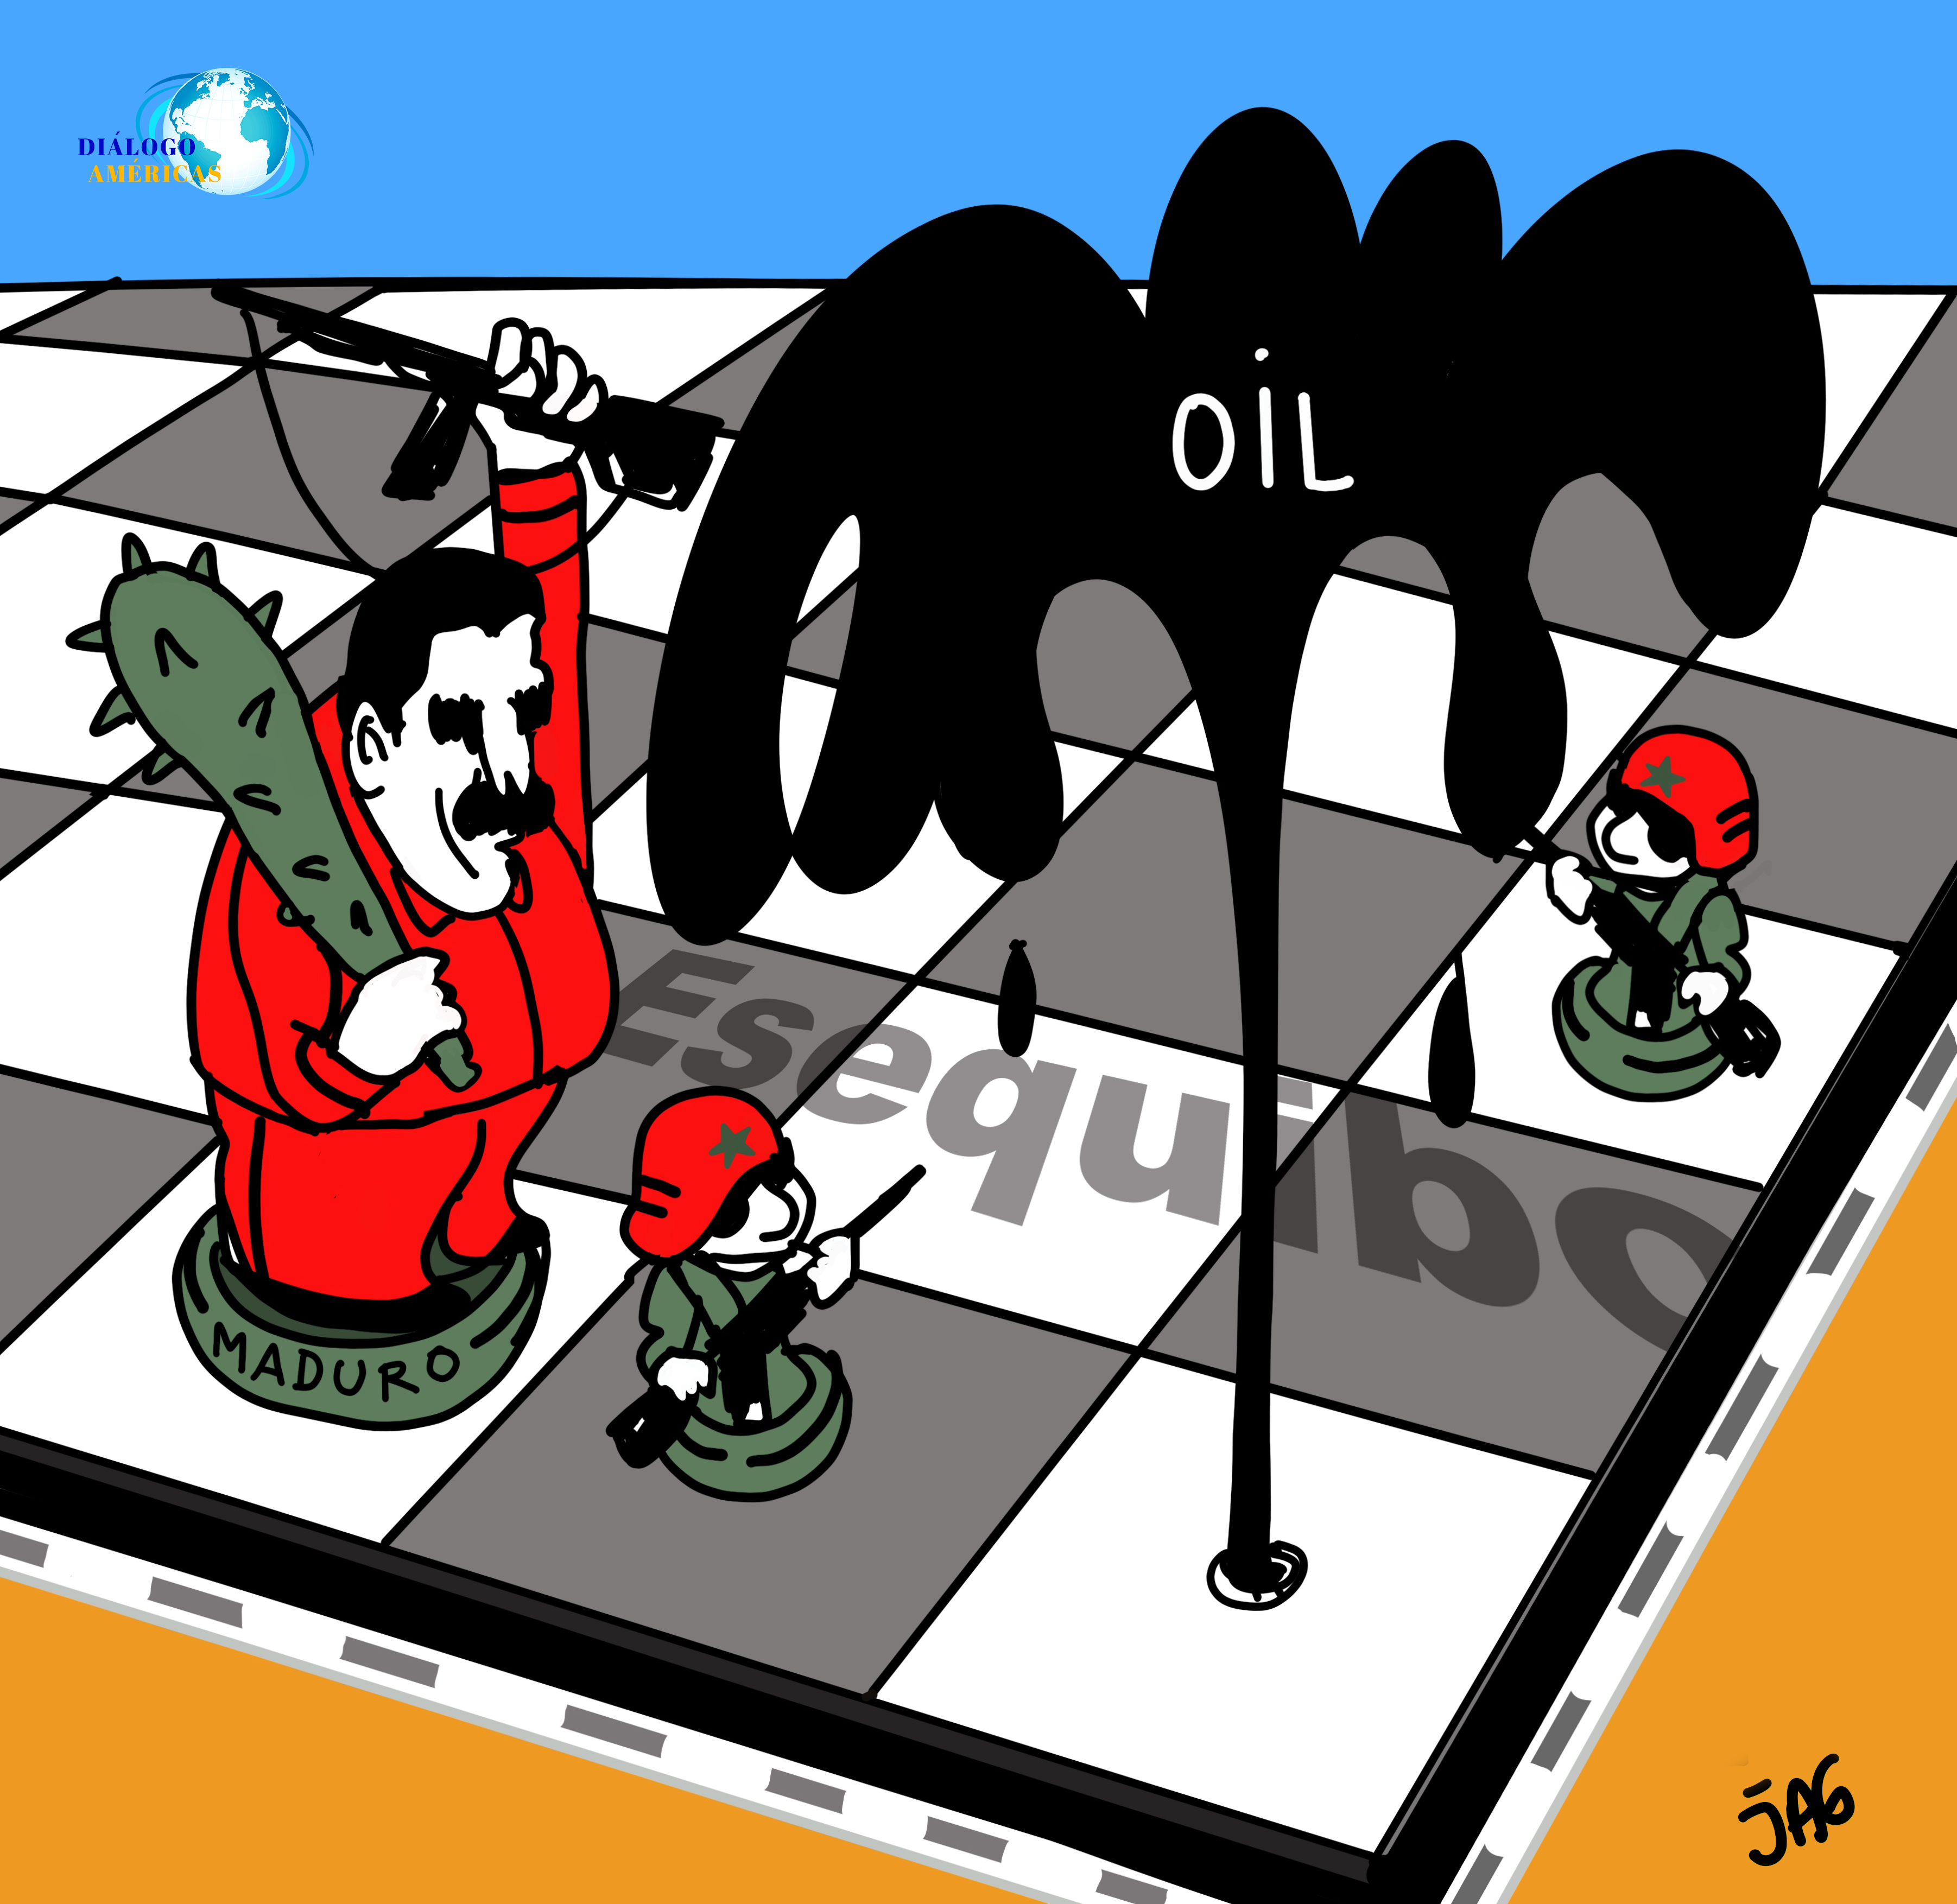 All for Oil